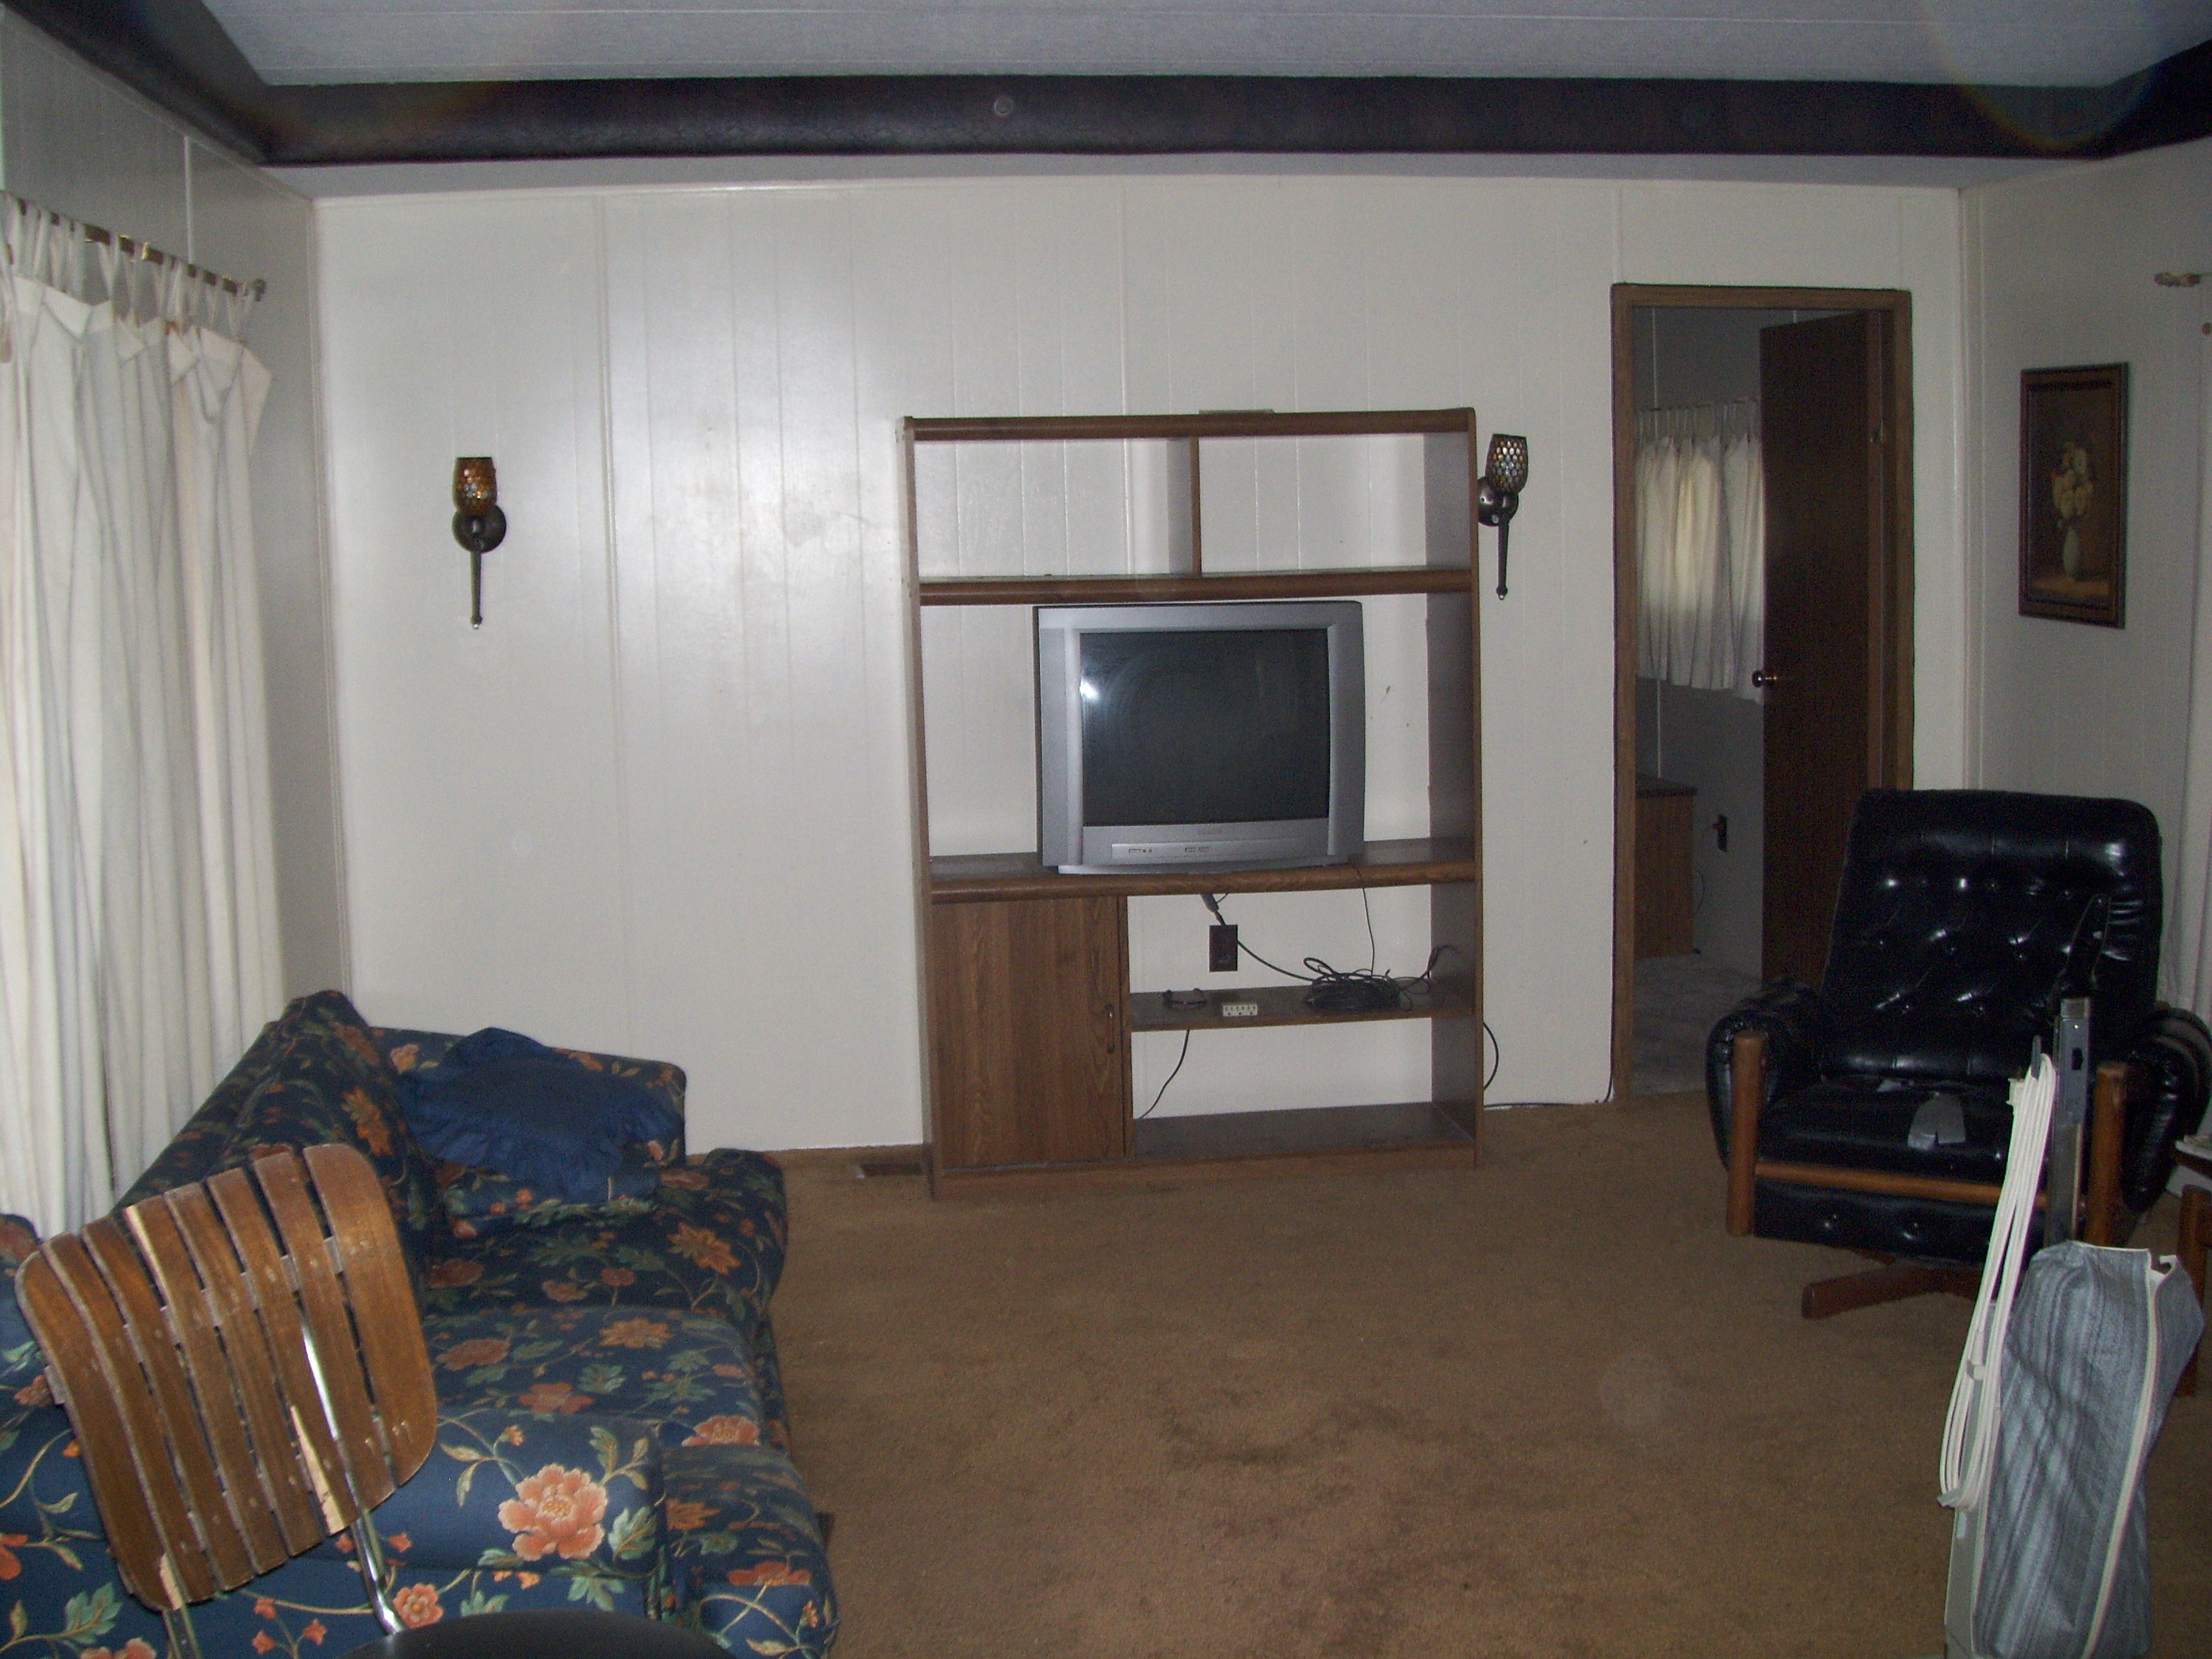 White Wood Paneled Walls, Brown Carpeting and White Floor To Ceiling Drapes.